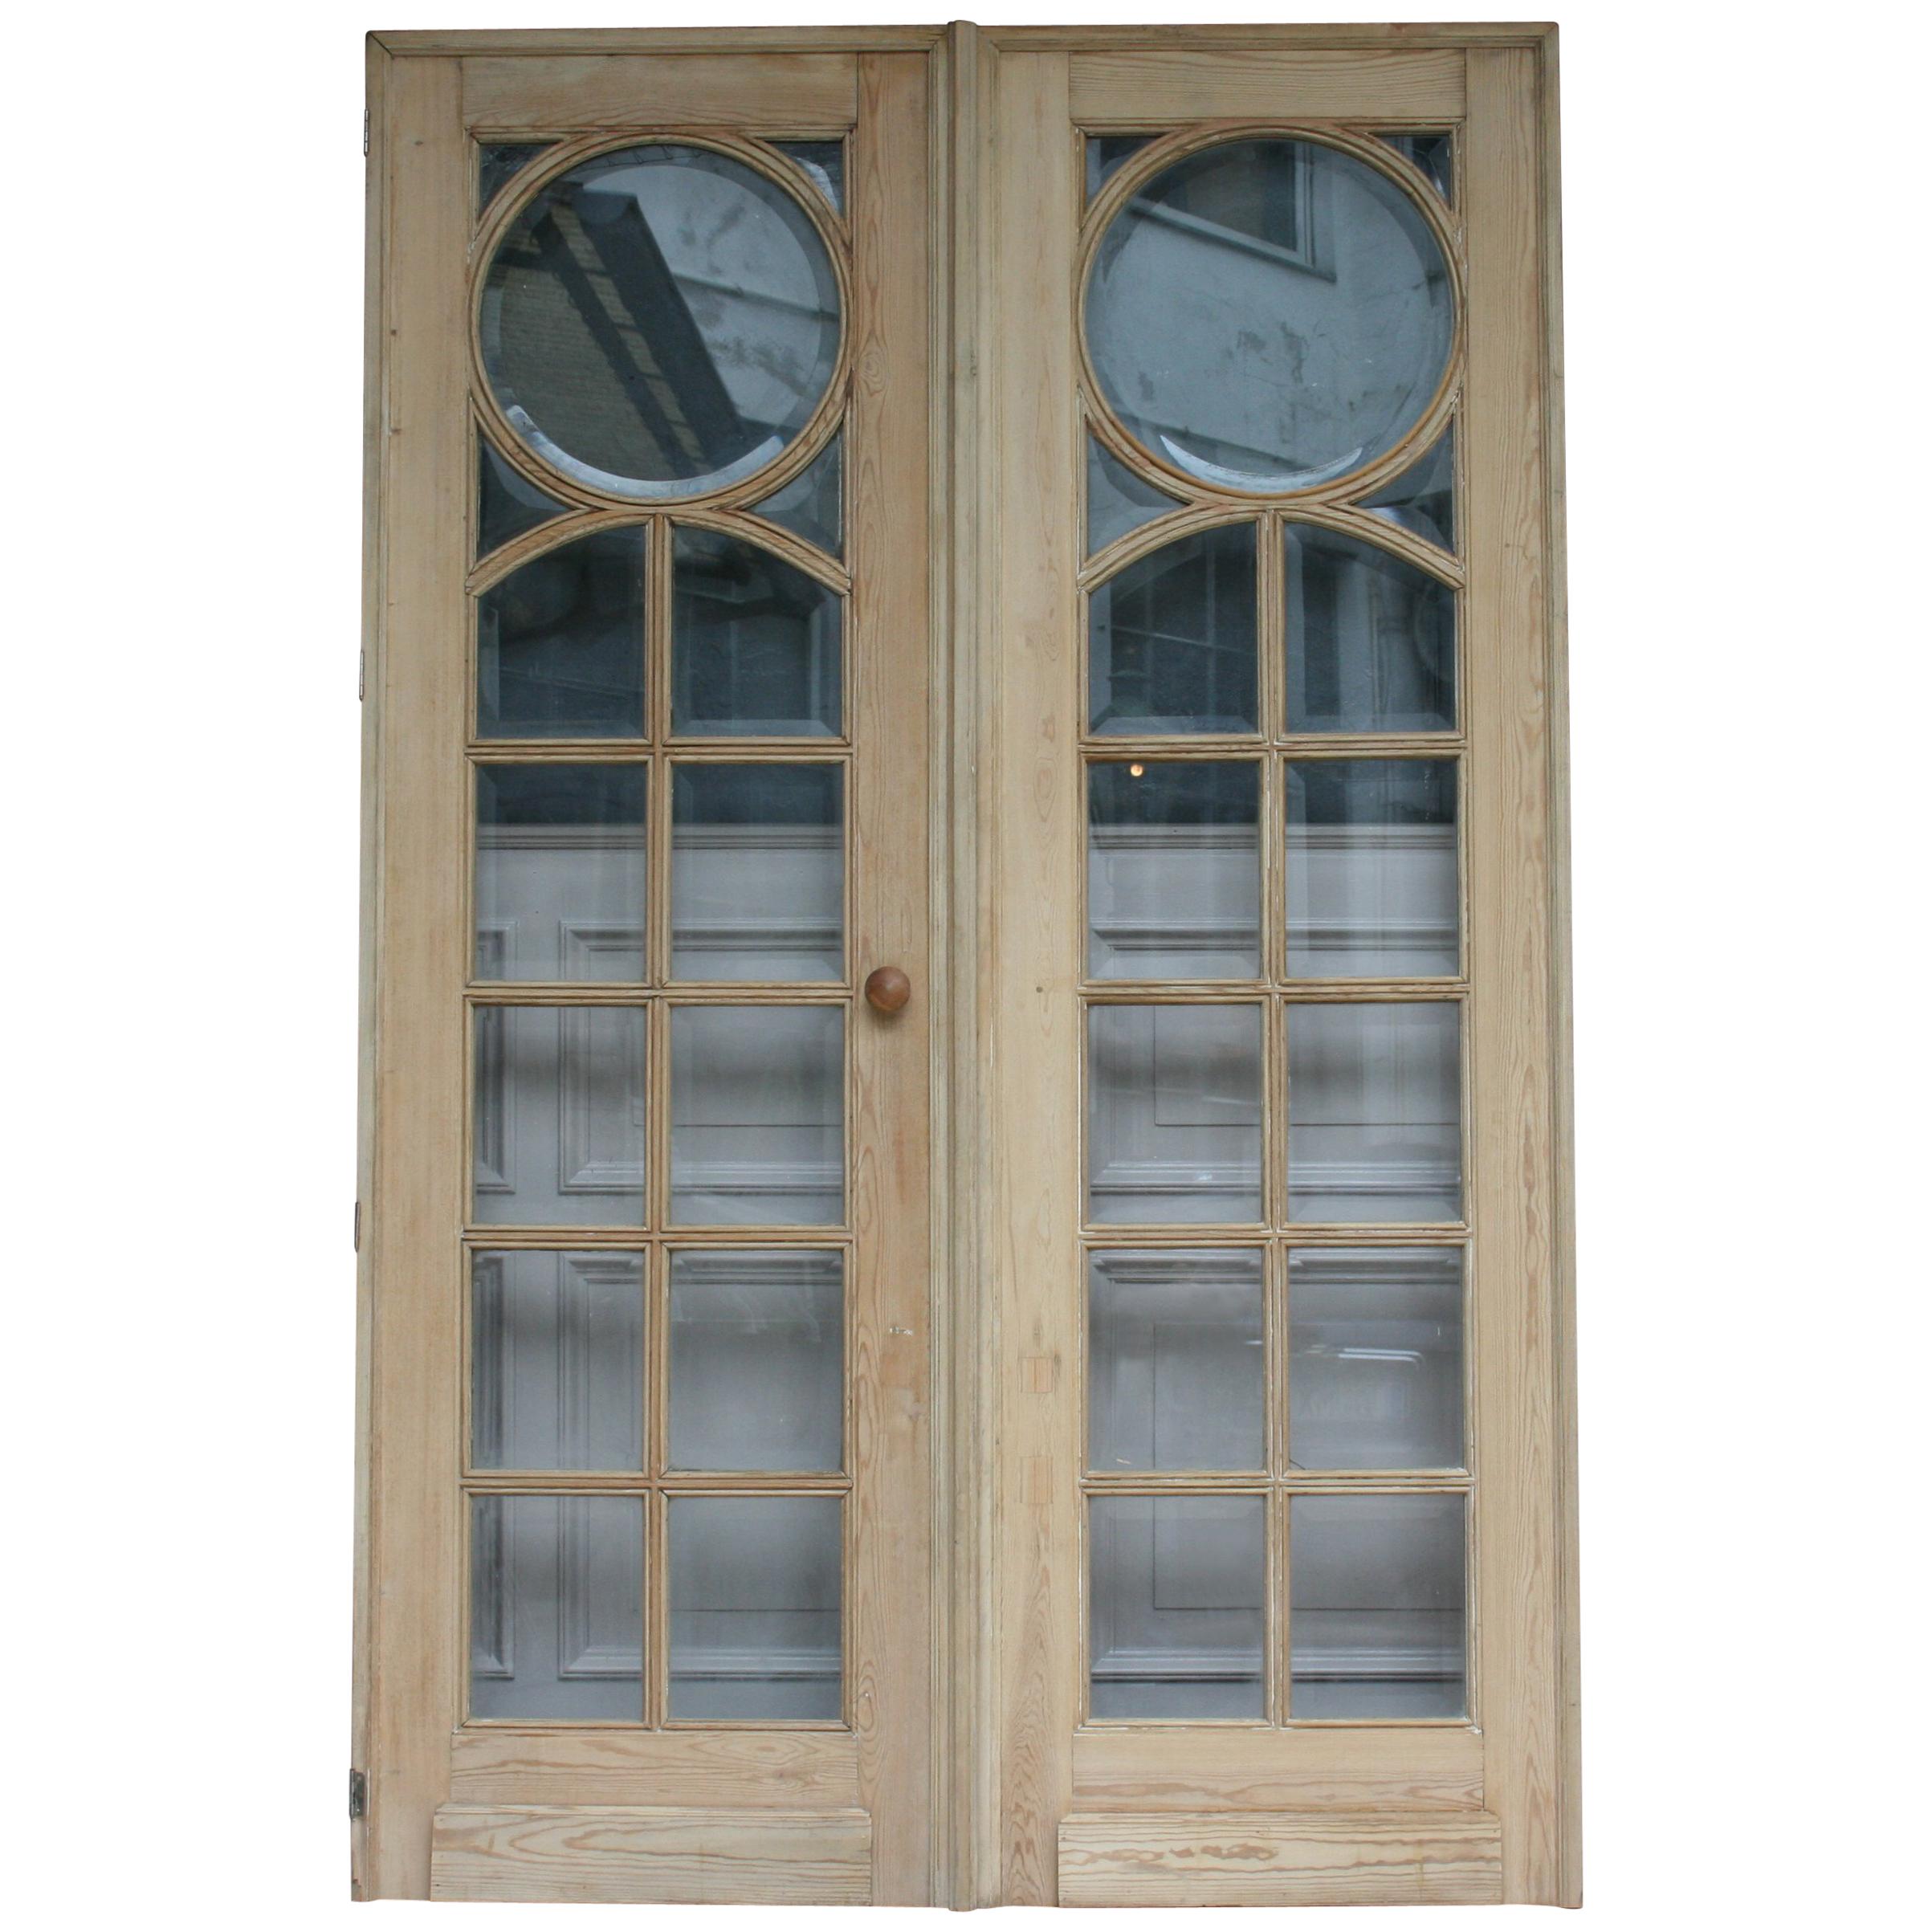 Pair of French Pine Doors with Beveled Glass, Art Deco, circa 1920s